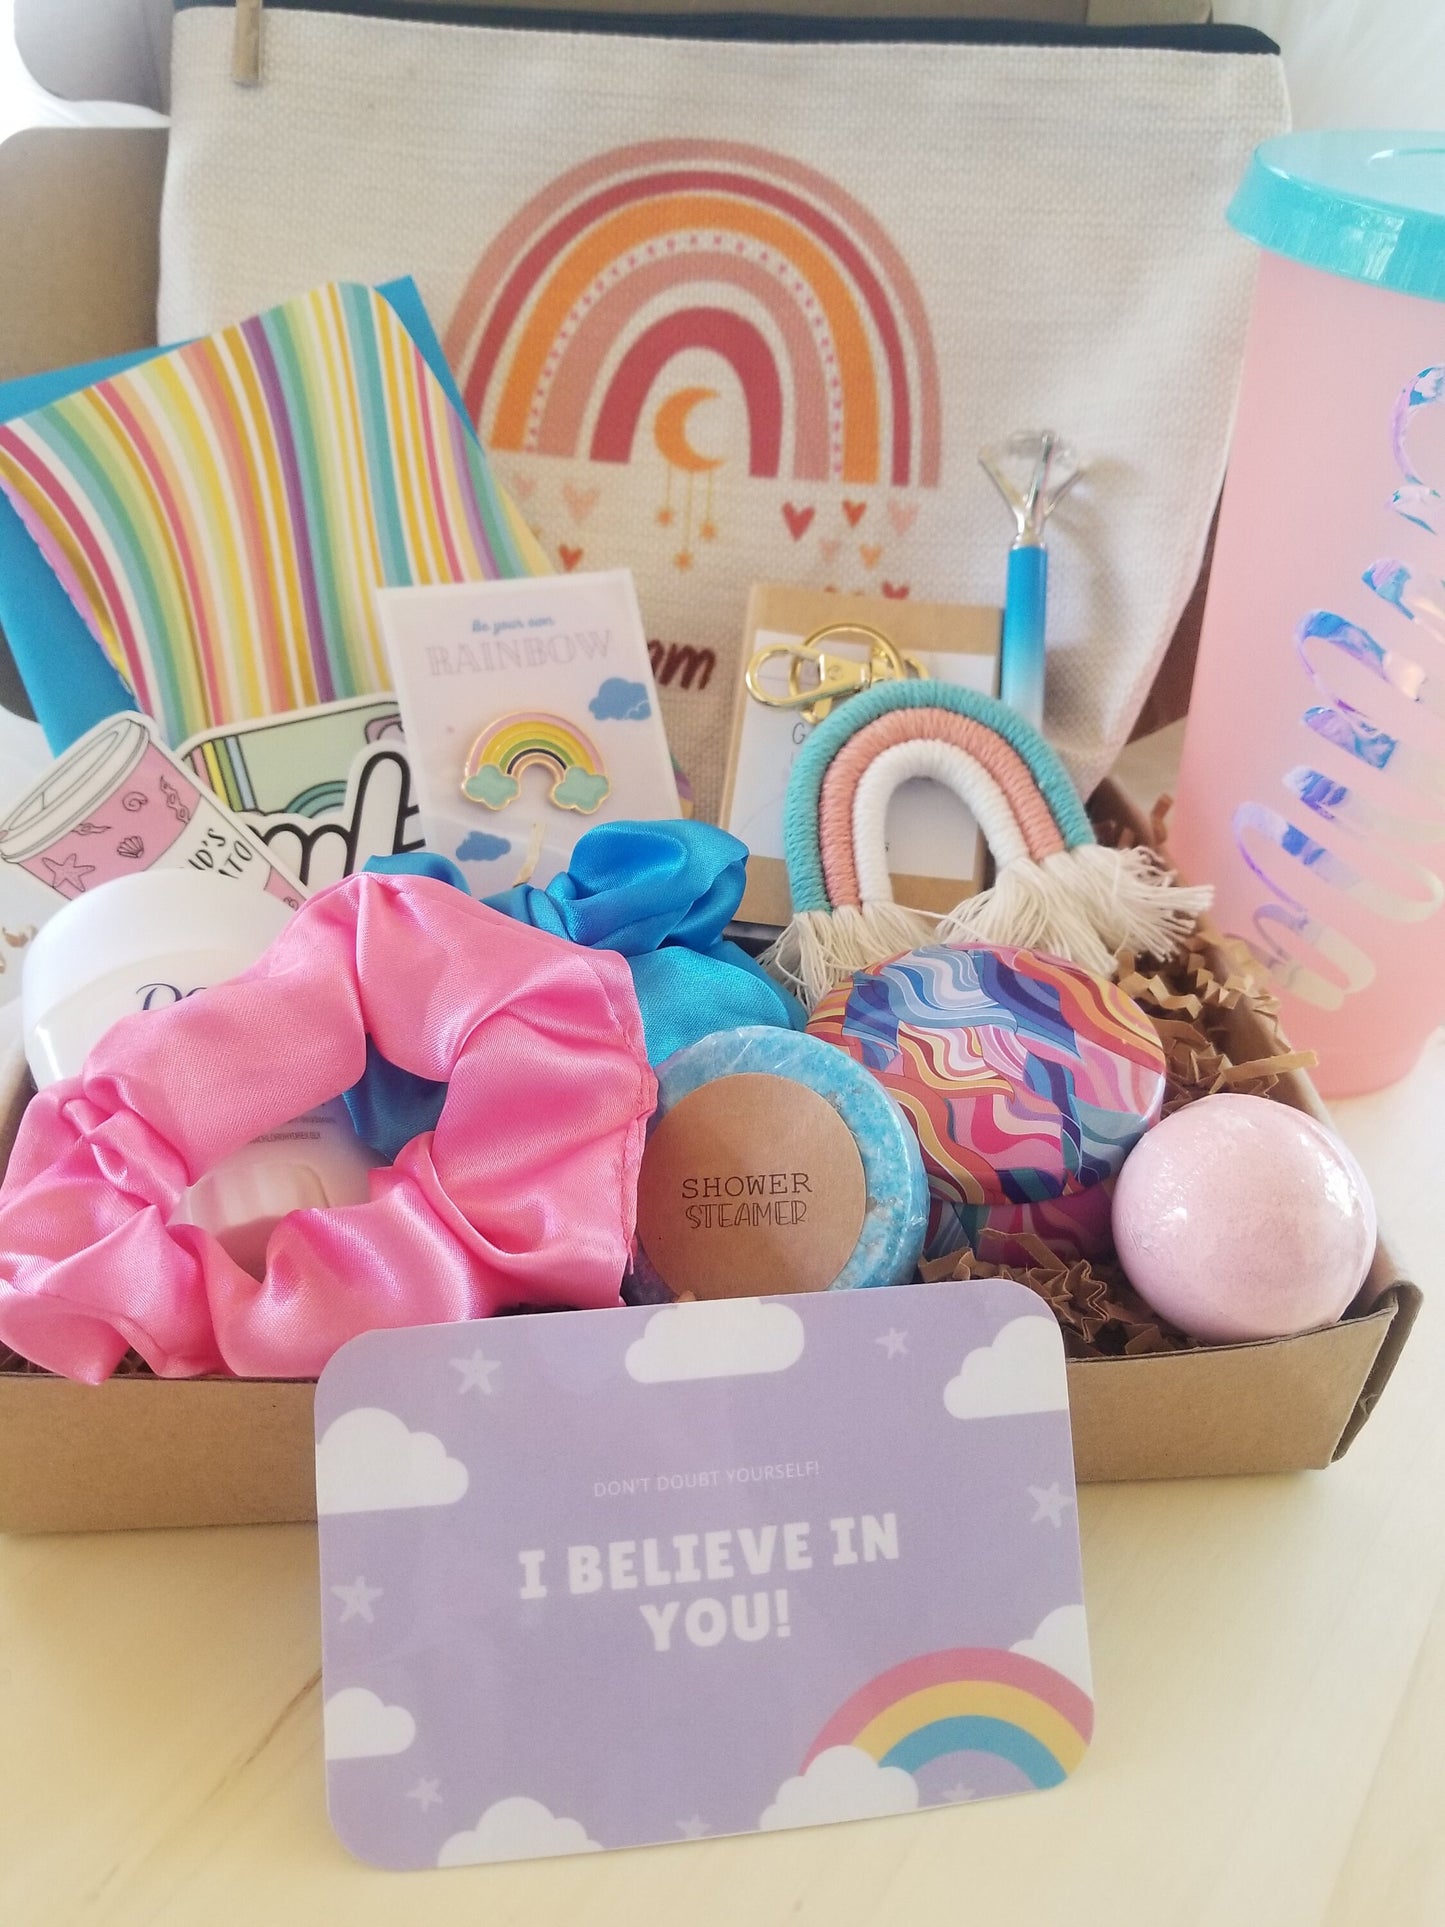 Dream big gift box for Teen/tween girl, personalized care package set